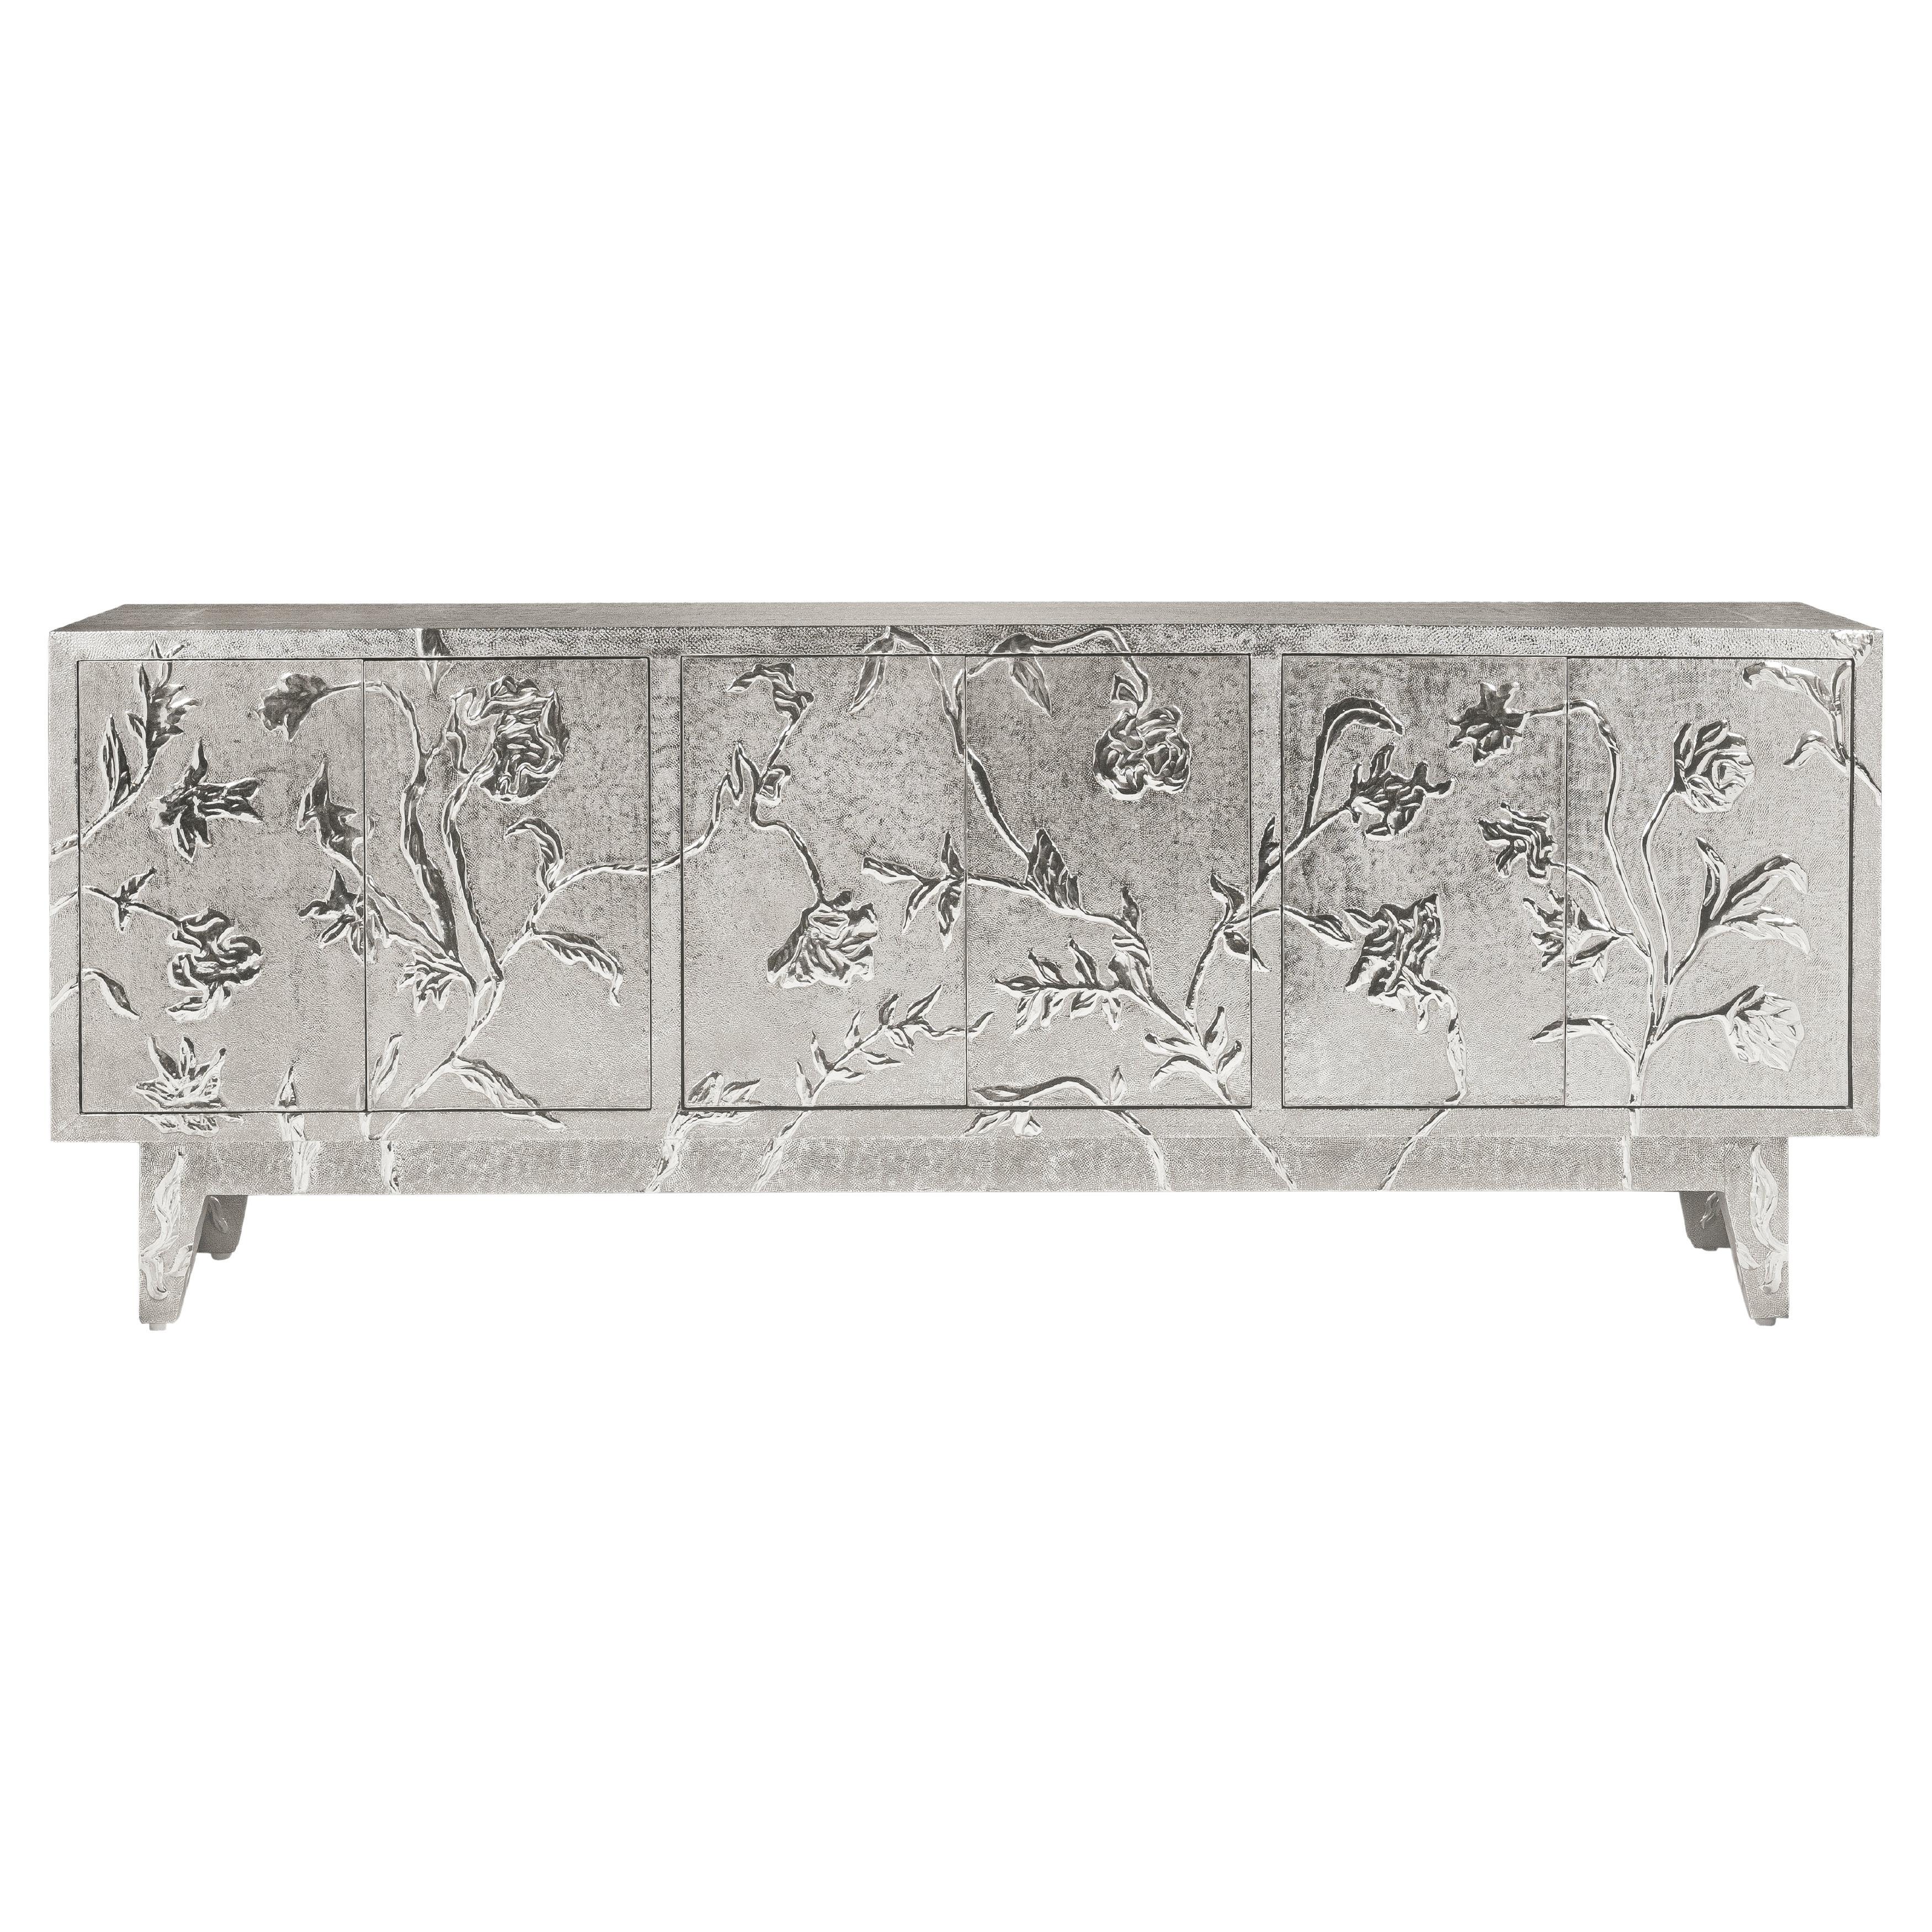 Art Deco Drawers in Floral Design by Stephanie Odegard For Sale